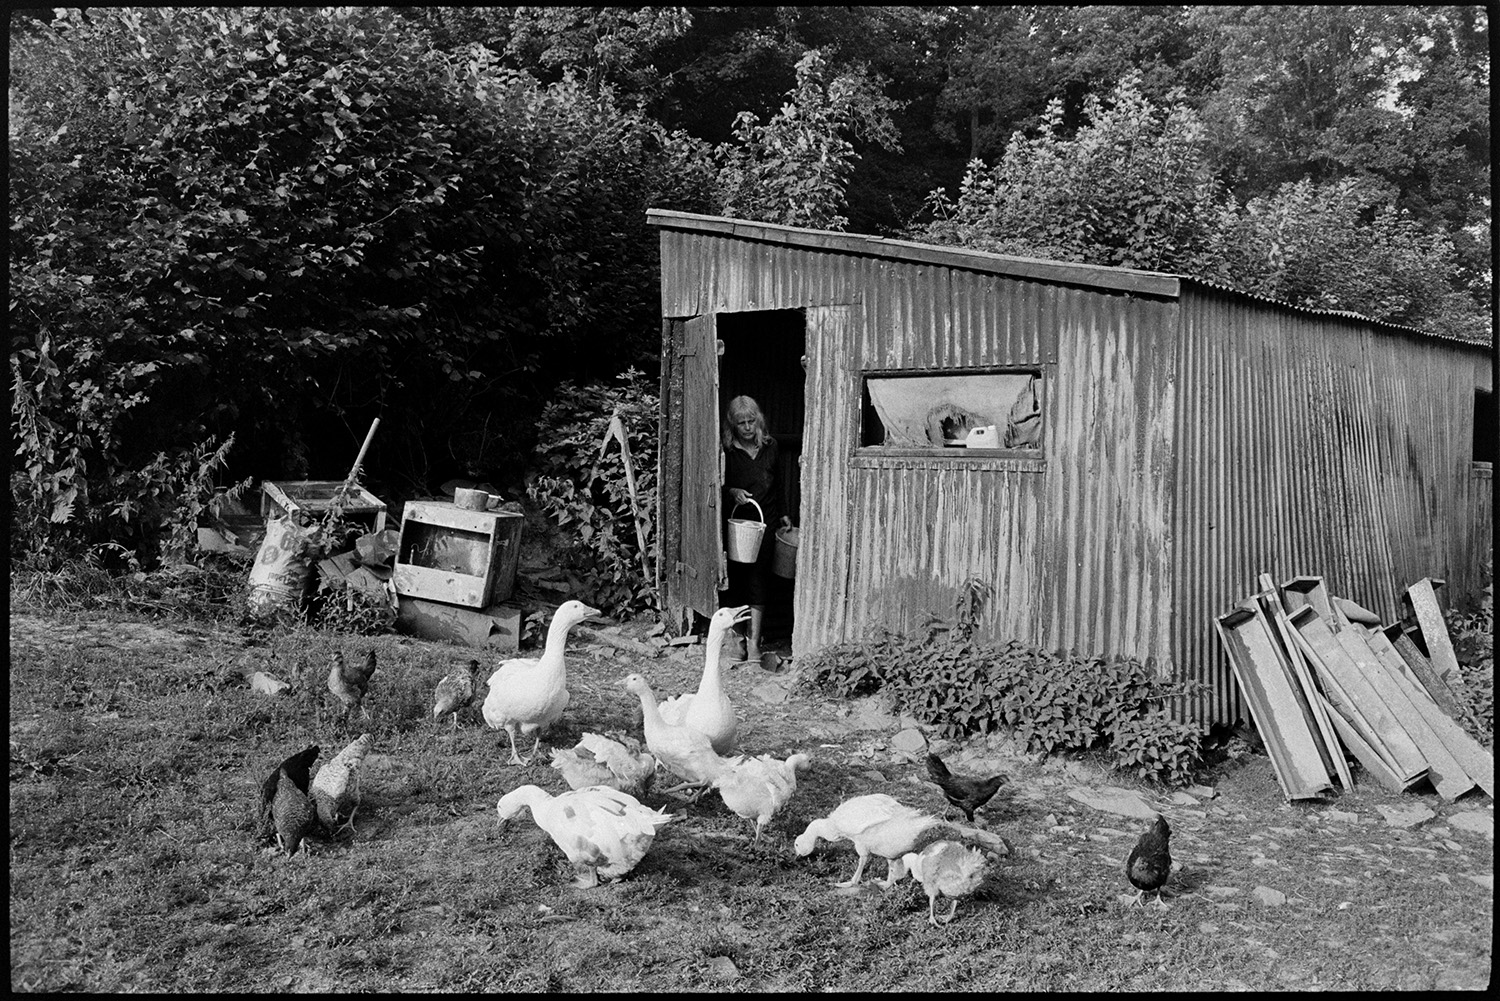 Woman farmer feeding geese, corrugated iron shed. 
[Jo Curzon feeding geese and chickens from a corrugated iron shed in a field at Millhams, Dolton.]